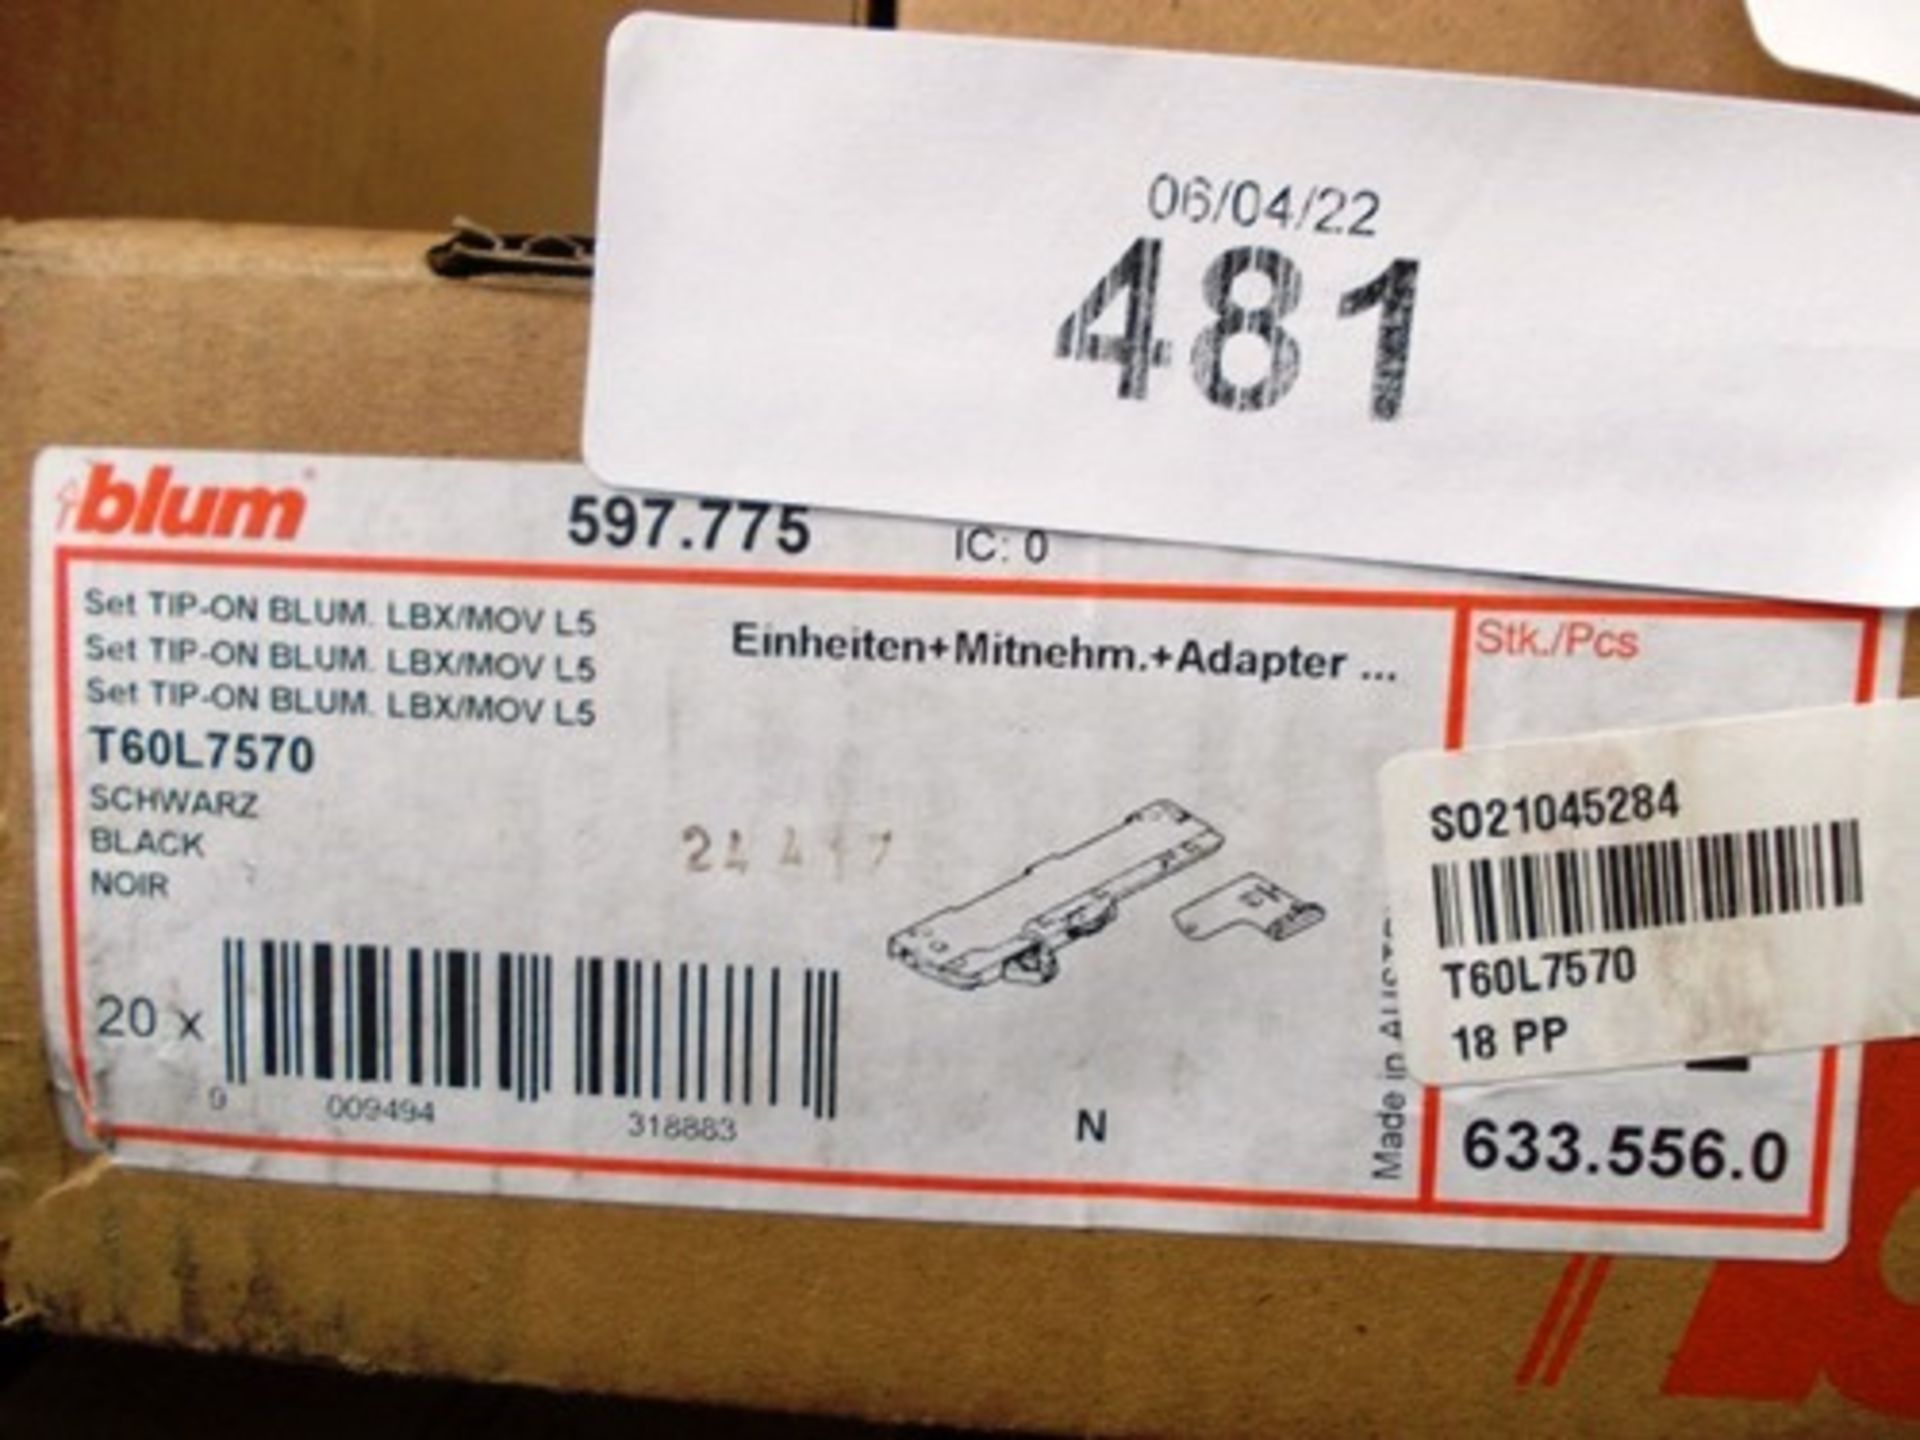 18 x Blum tip on and latch style drawer runners for Legrabox and Moventon, code T60L7570 - New in